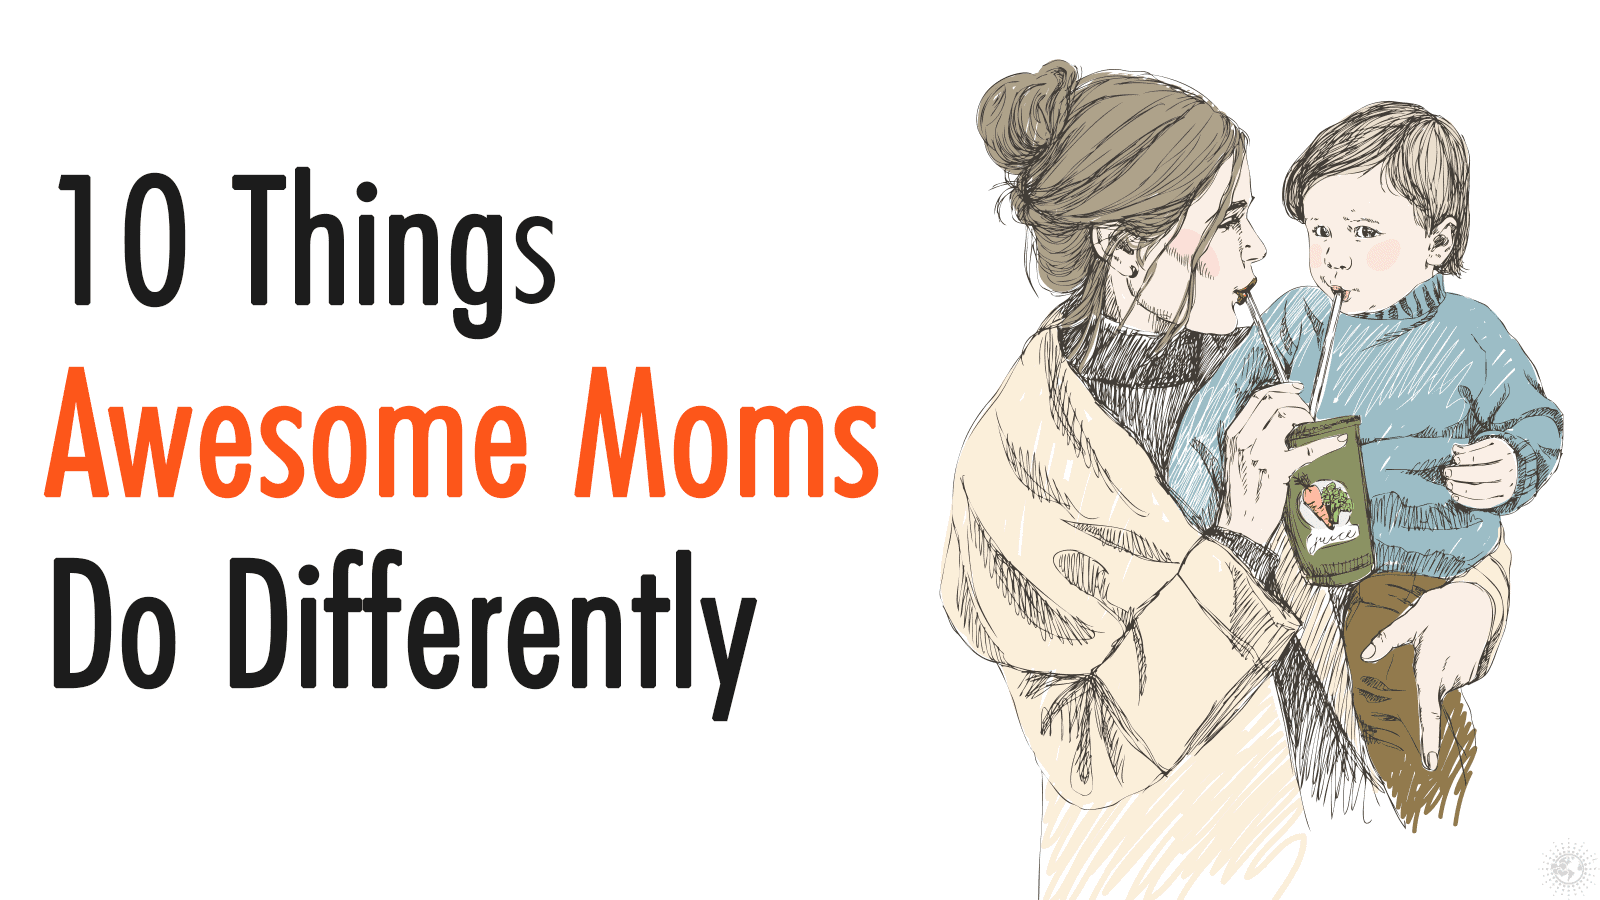 10 Things Awesome Moms Do Differently